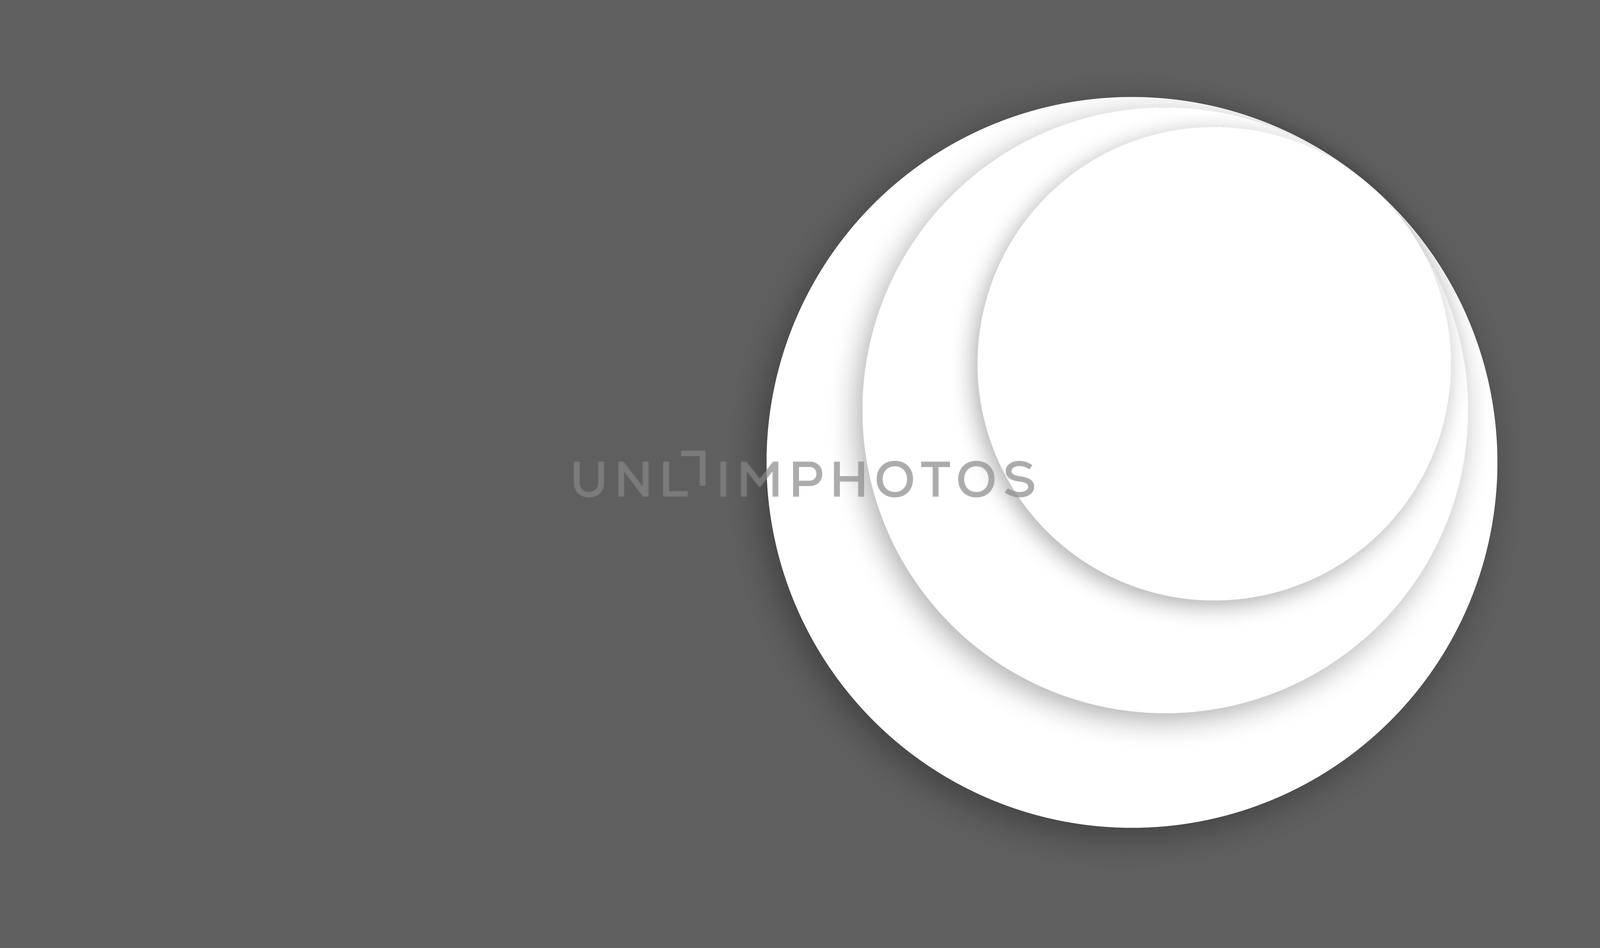 three circles overlapping on each other in a gray background with soft shadow, layered image ready to print for cards, invitation, design print